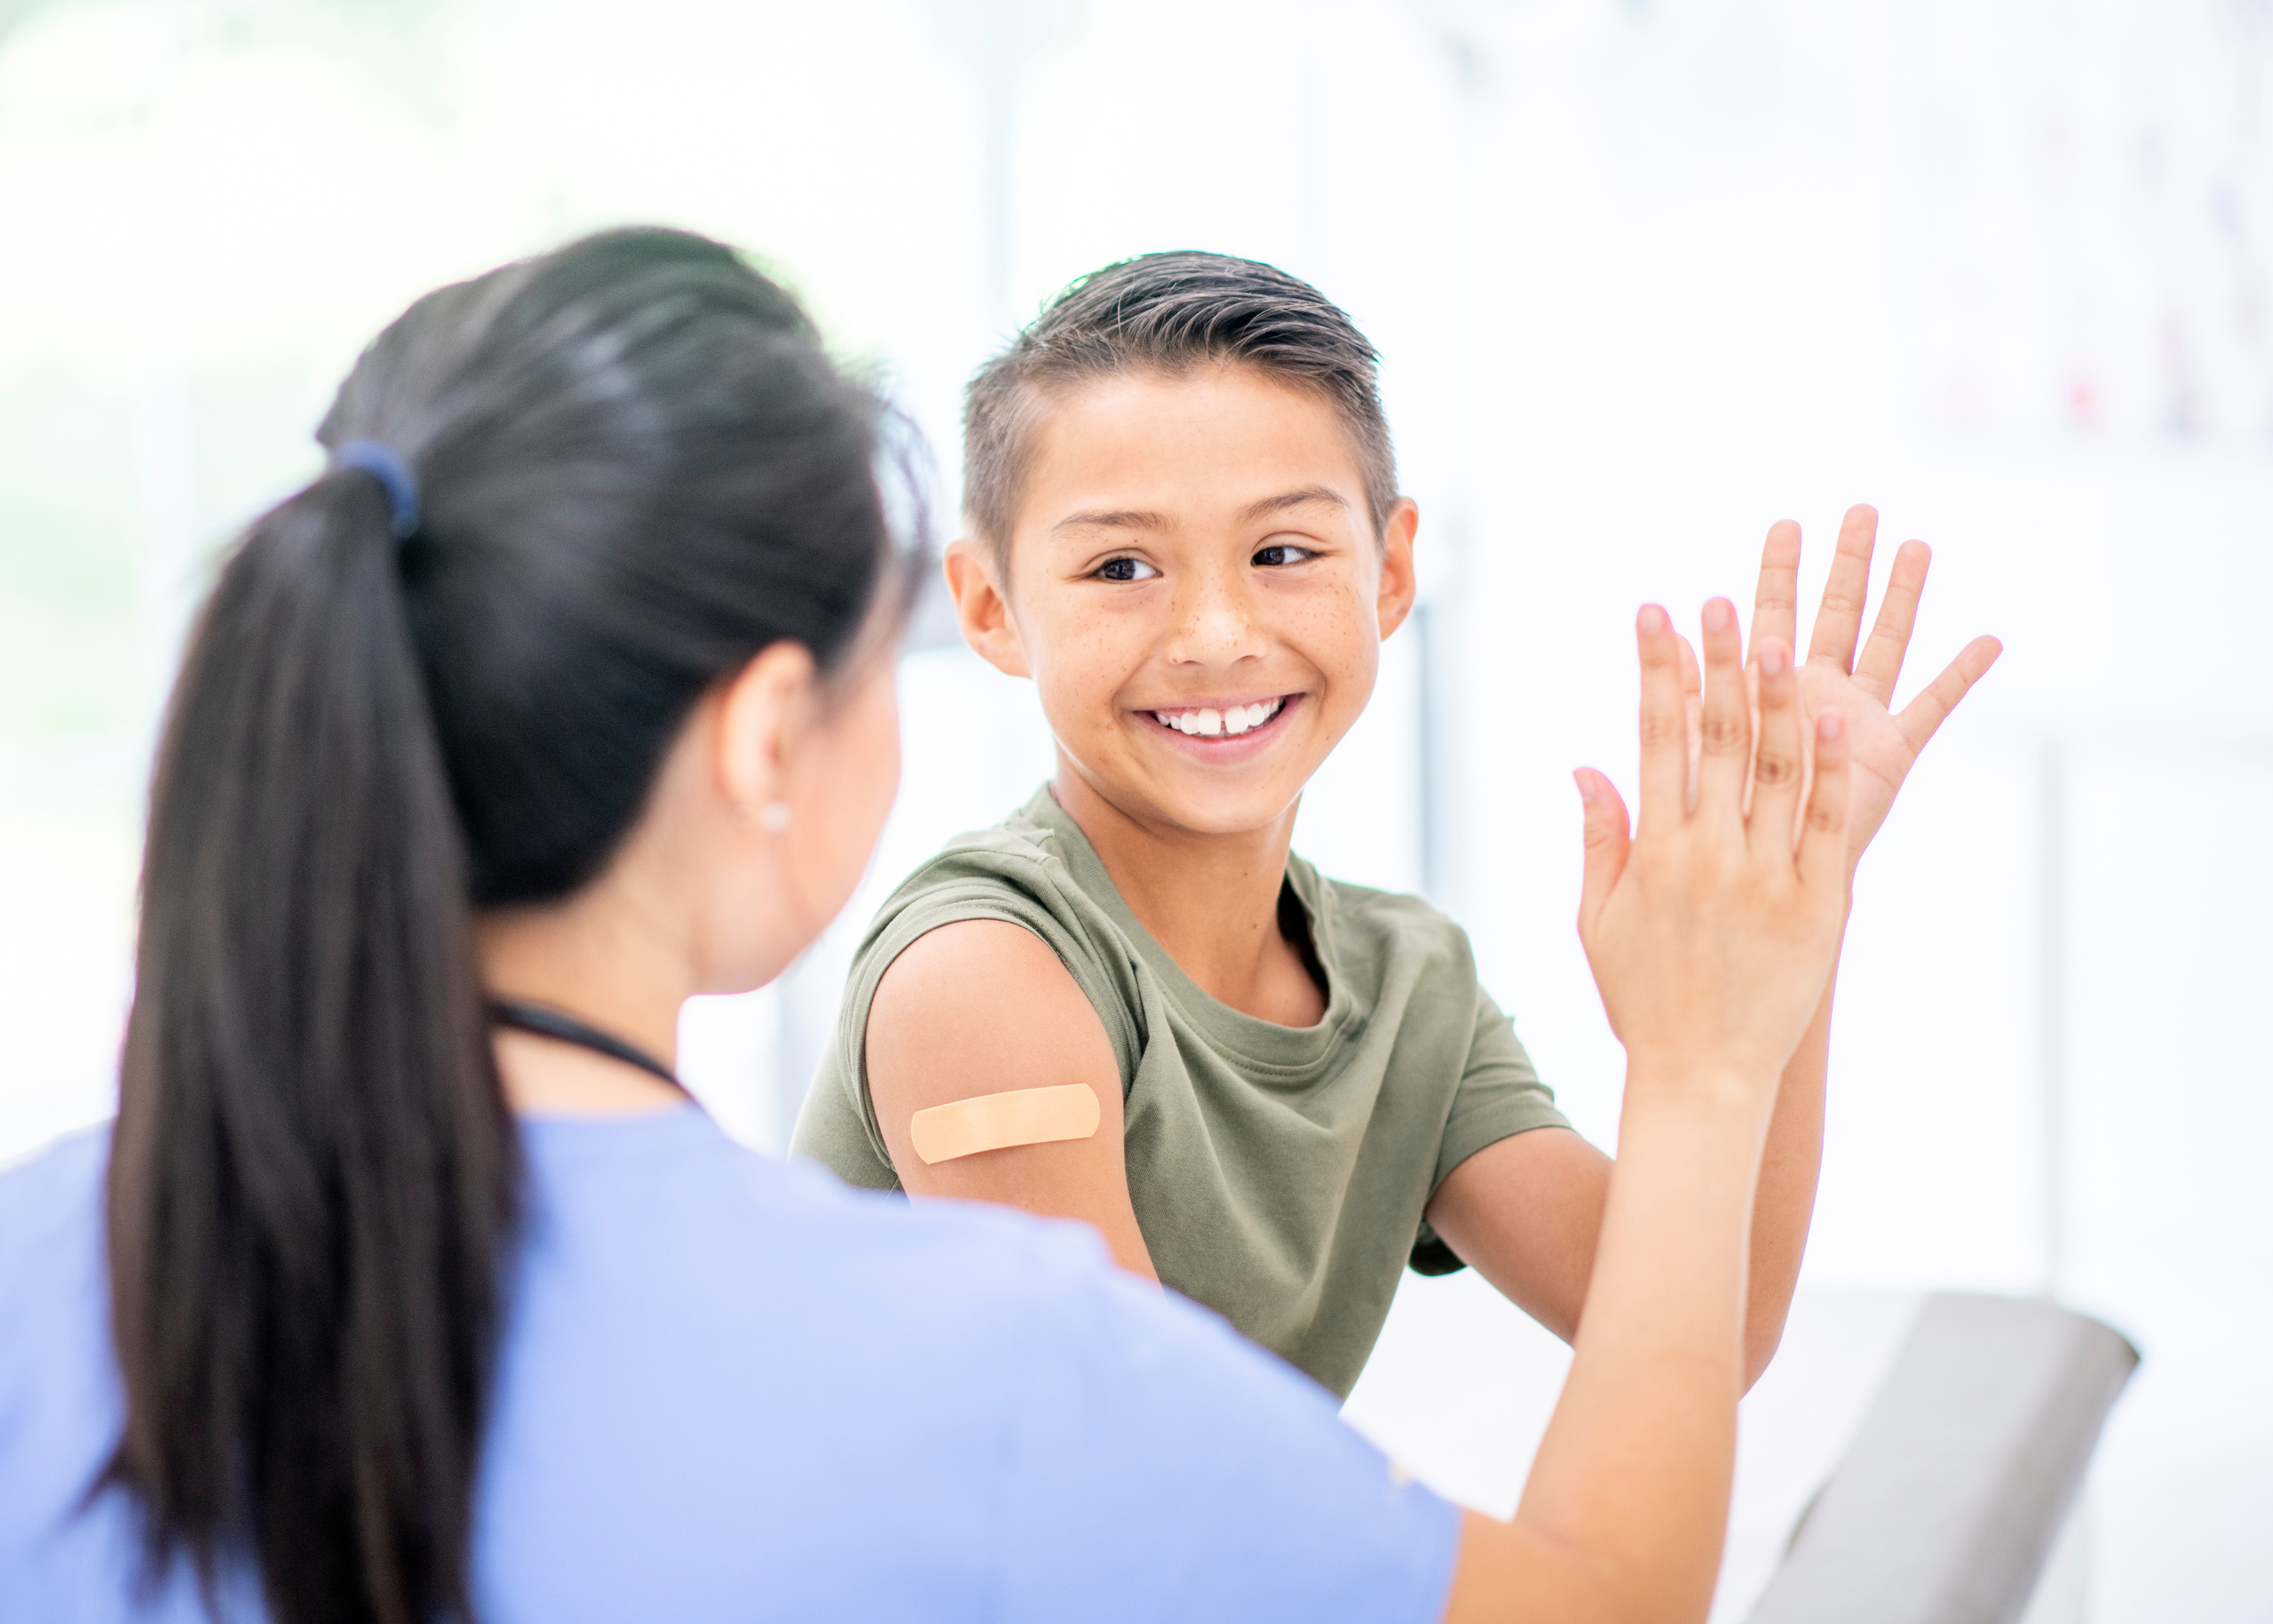 Immunizations are the Best Way to Protect Our Children